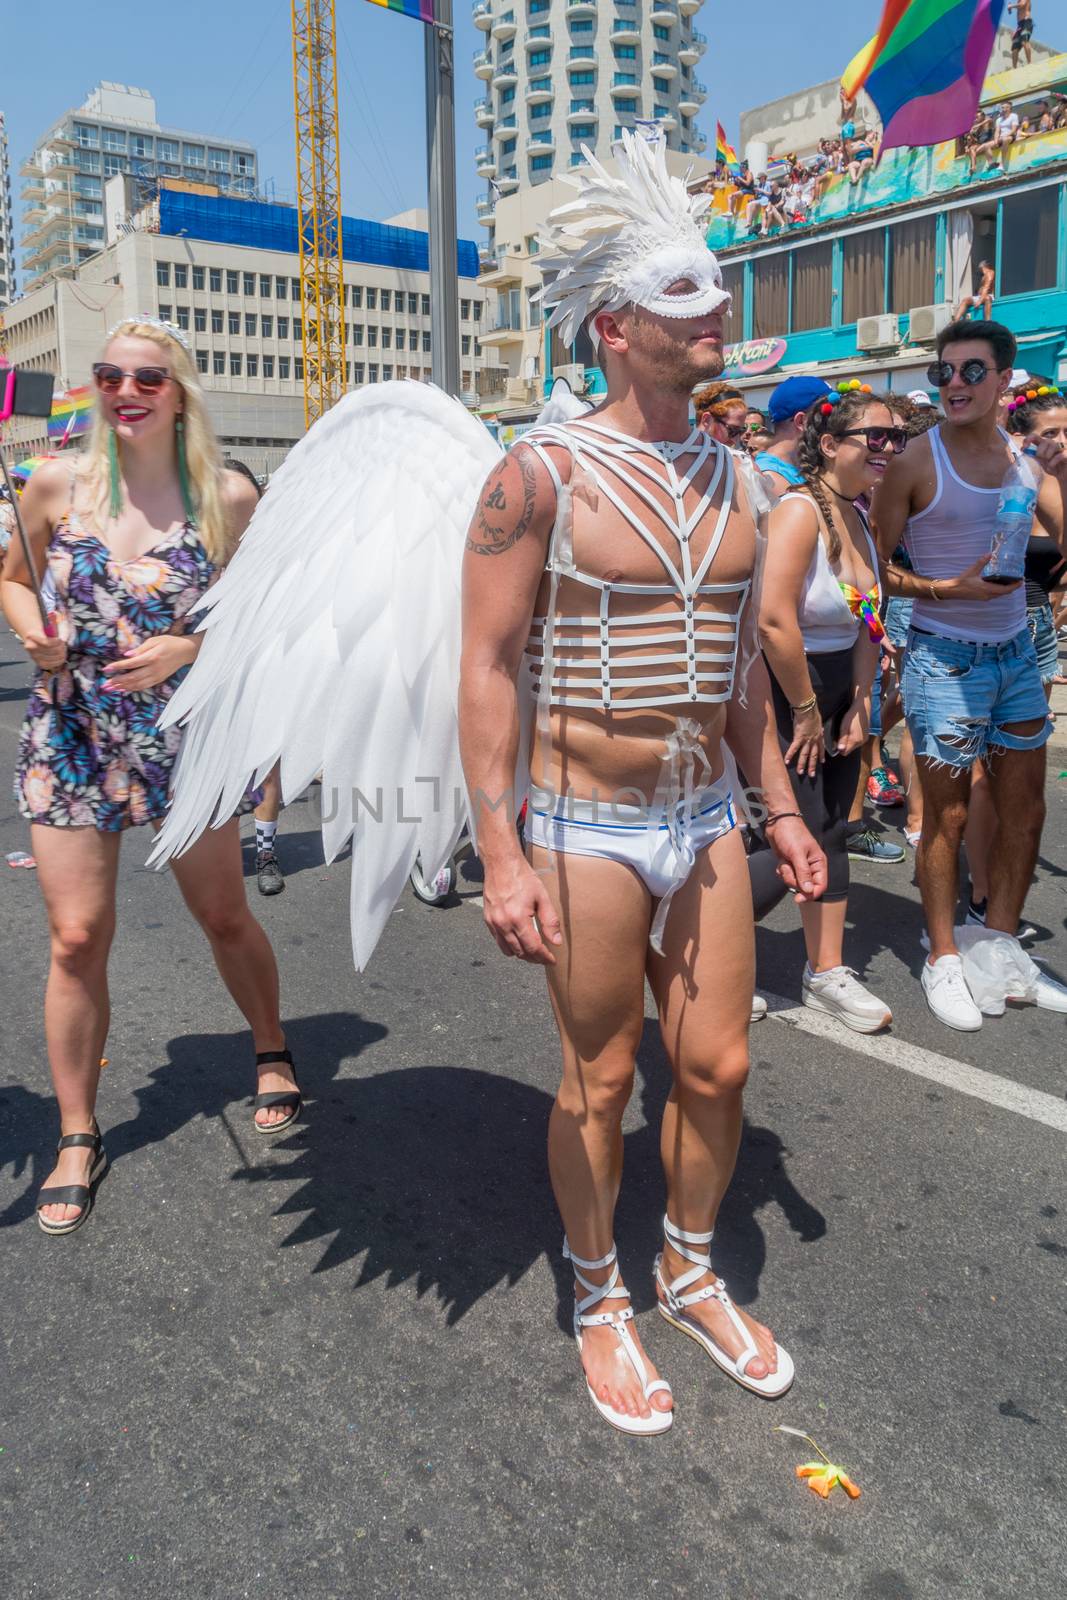 TEL-AVIV, ISRAEL - JUNE 08, 2018: Various people march and take part in the annual pride parade of the LGBT community, in Tel-Aviv, Israel